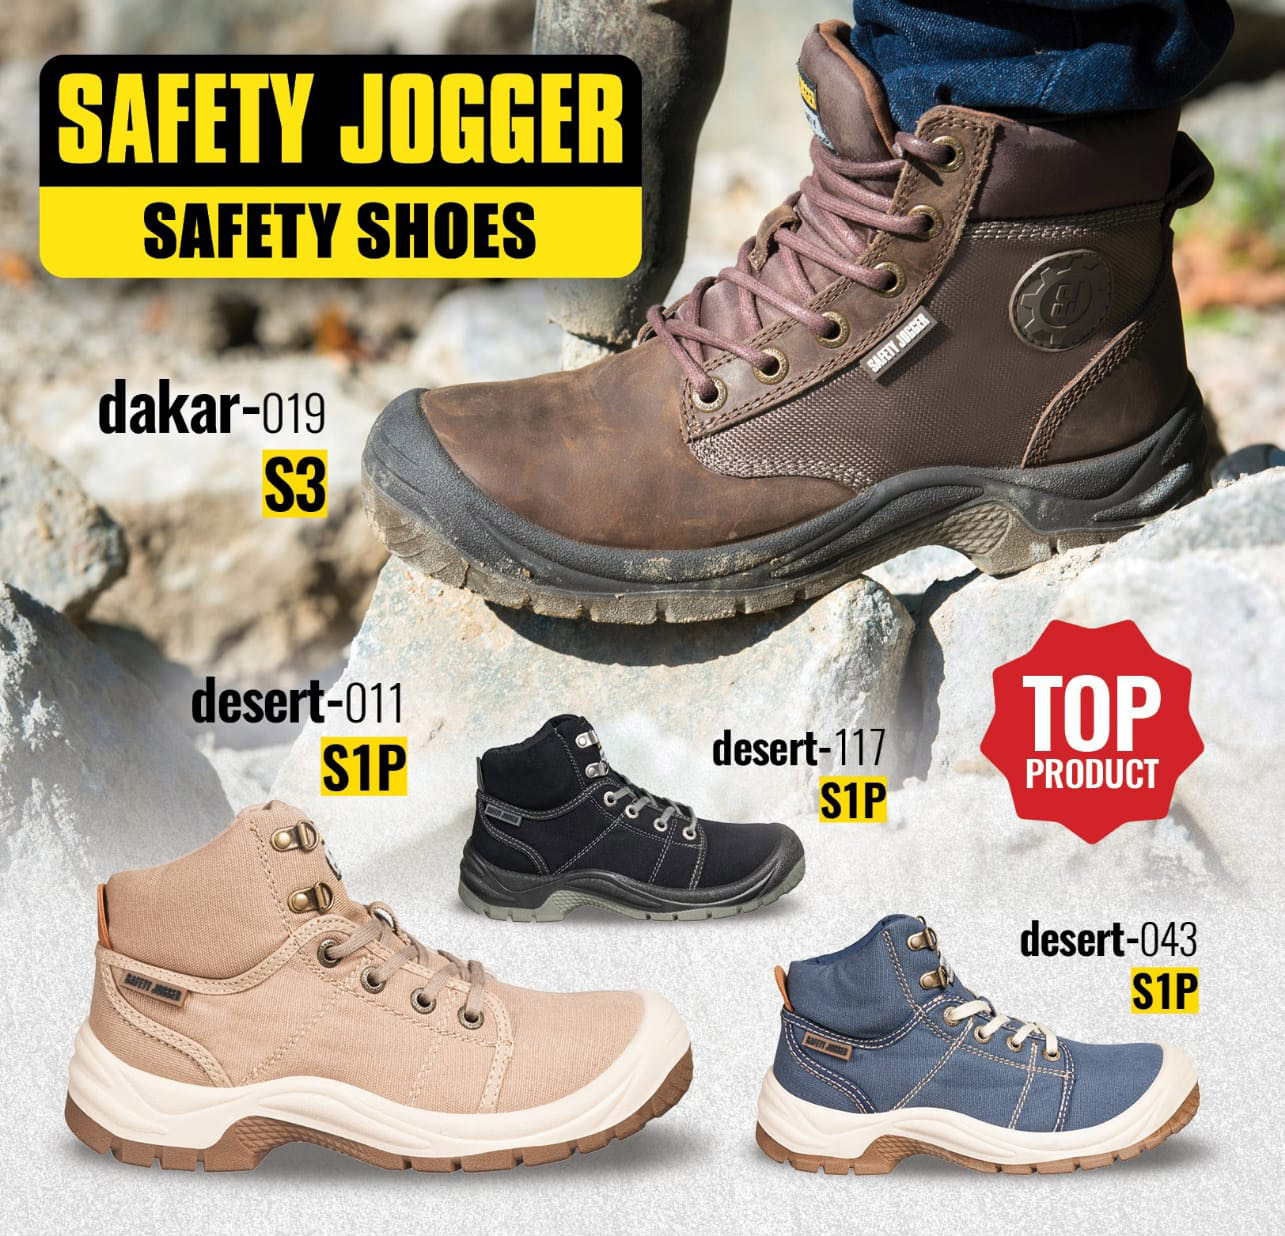 Safety Jogger - Safety Shoes